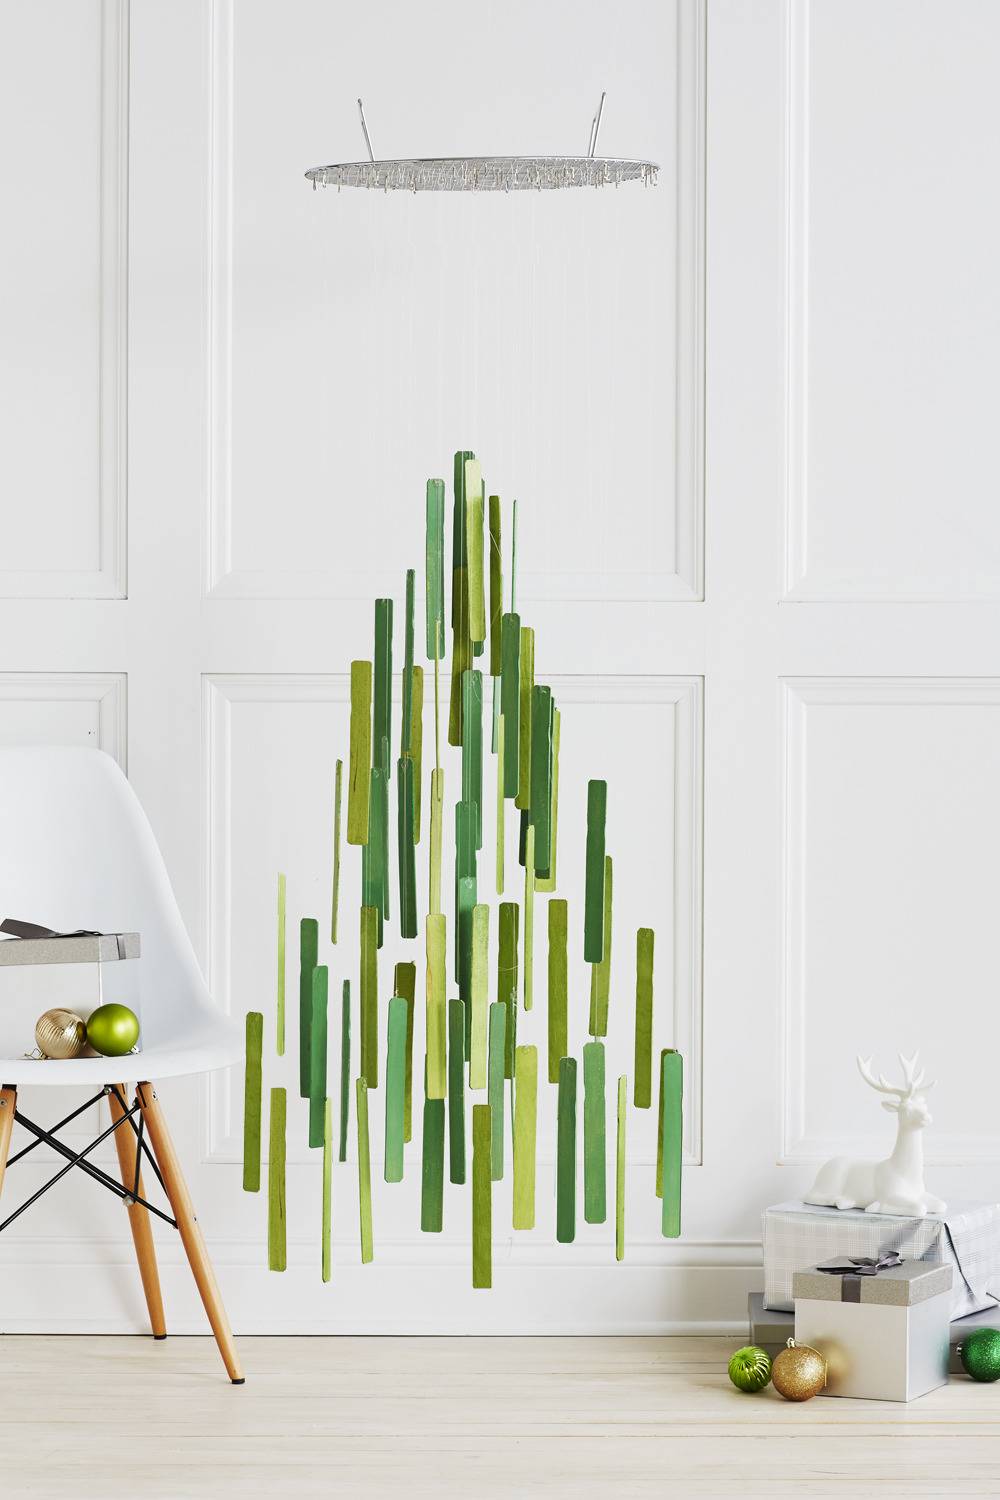 Strips in different shades of green that are hanging from a mobile in the shape of a tree.